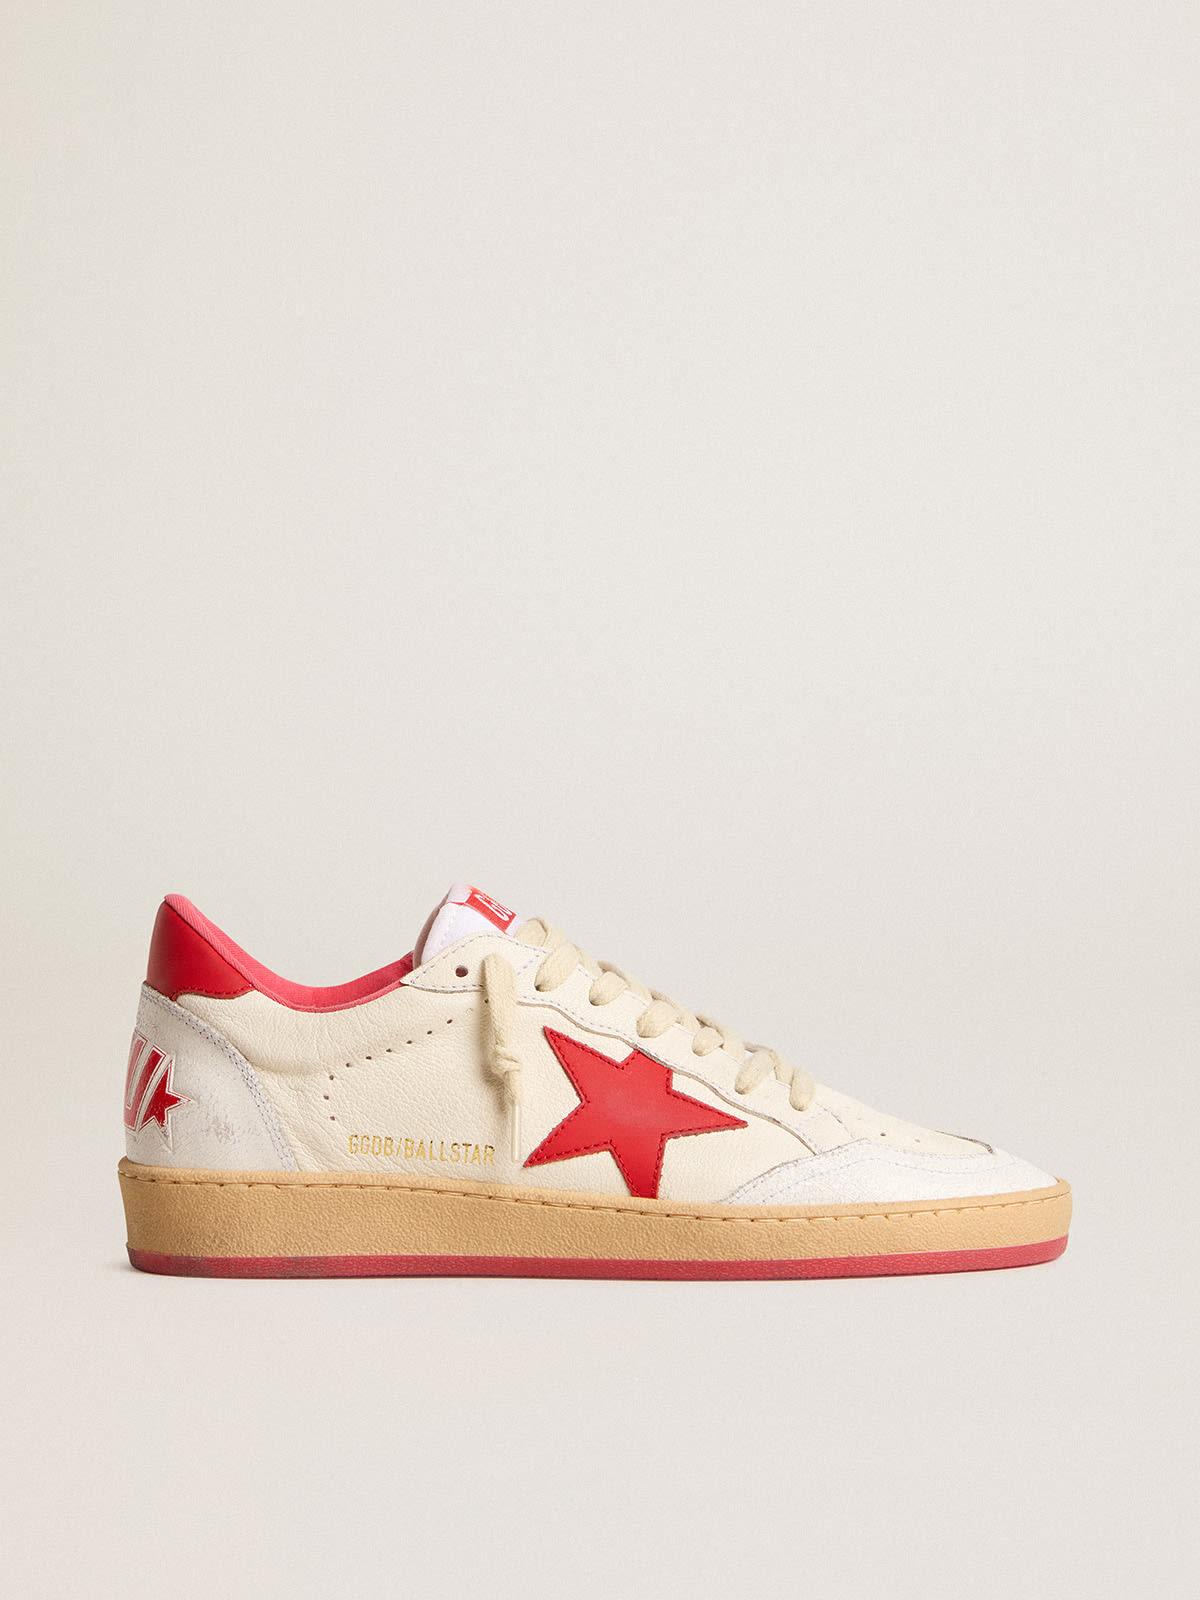 Women’s Ball Star Wishes in white leather with a red star and heel tab ...